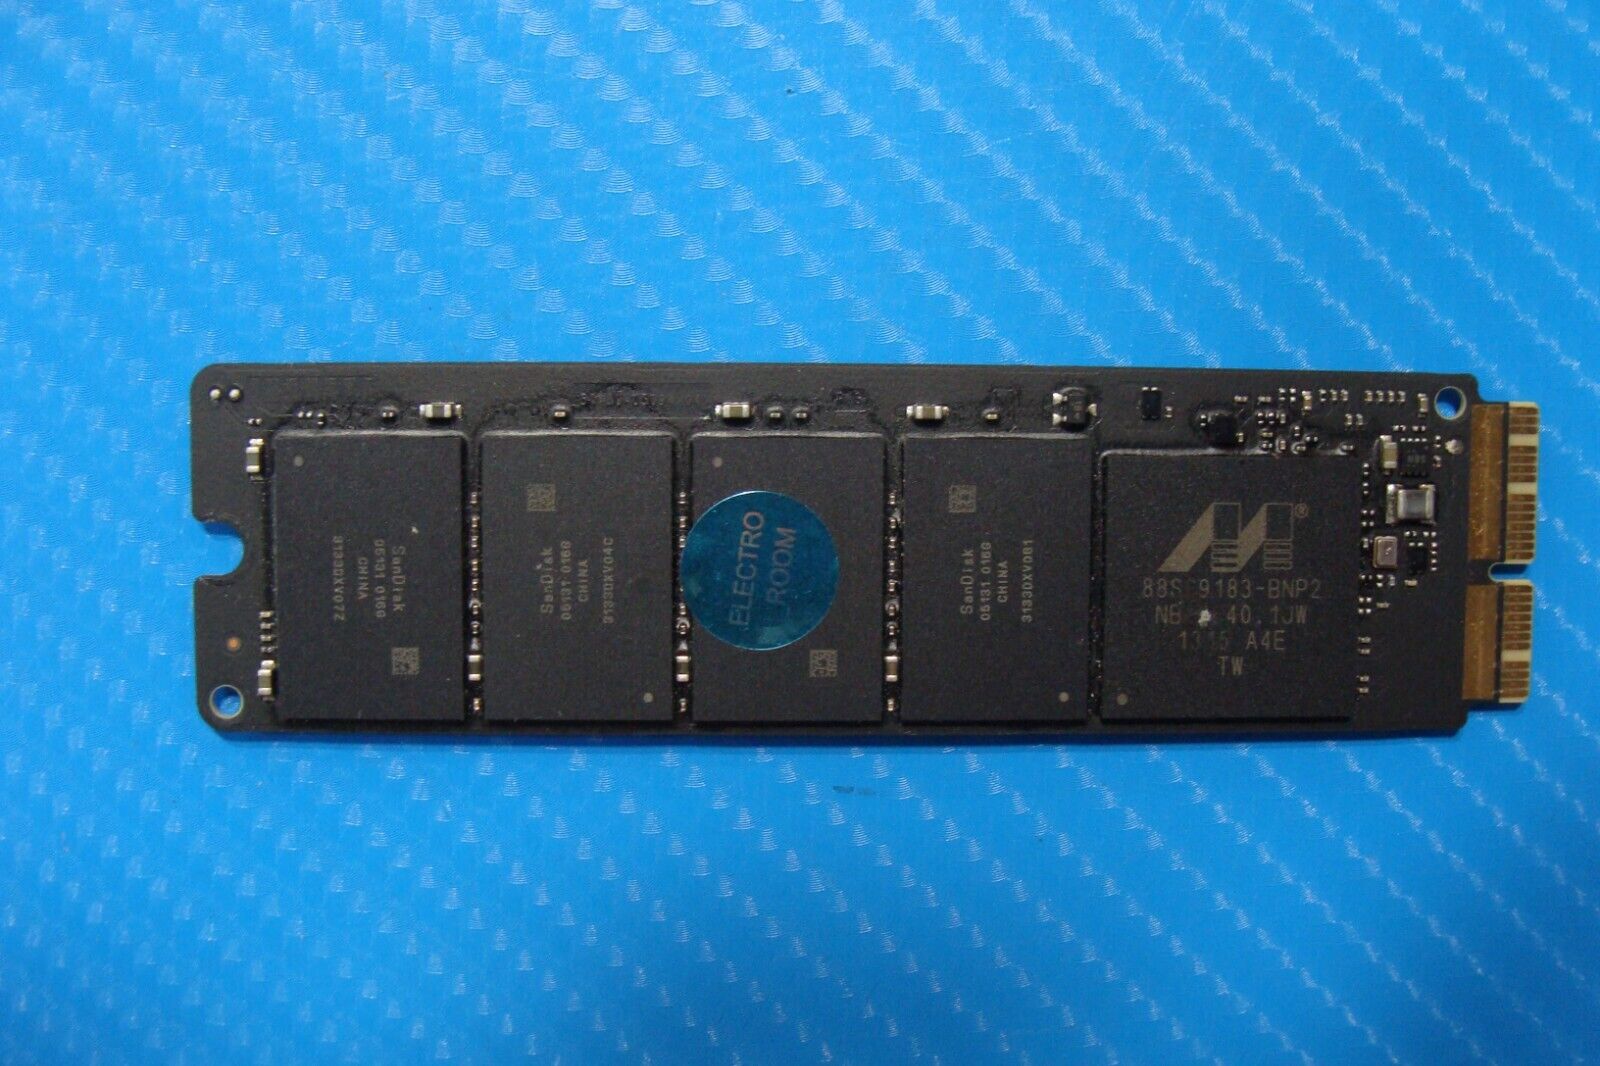 MacBook Air A1465 SanDisk 128GB SSD Solid State Drive SD6PQ4M-128G-1021 661-7456